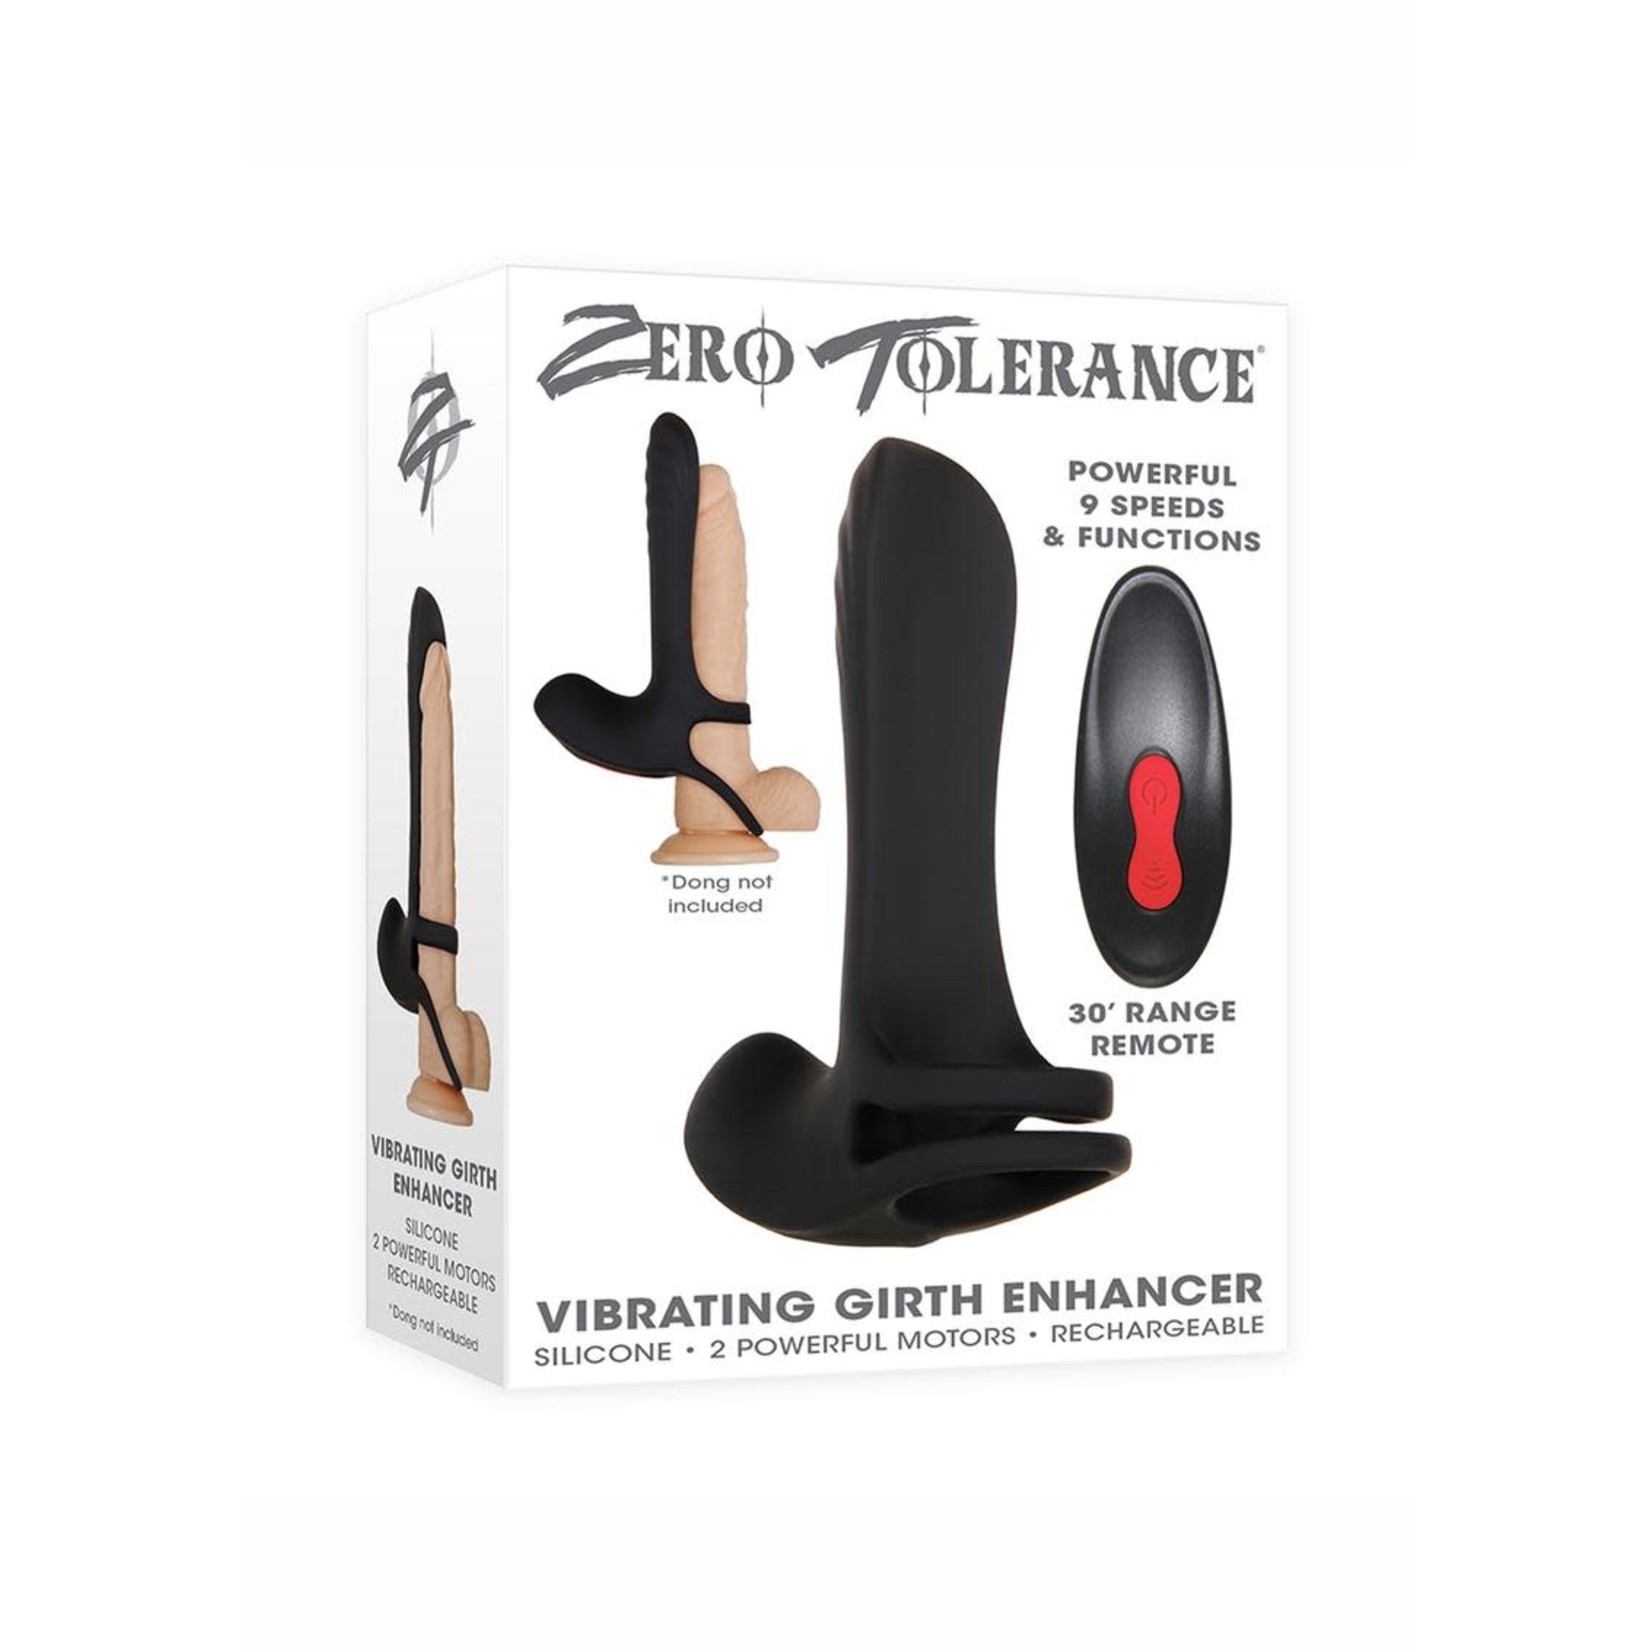 Zero Tolerance Vibrating Girth Enhancer Silicone Rechargeable Sleeve With Remote Control - Black/Red